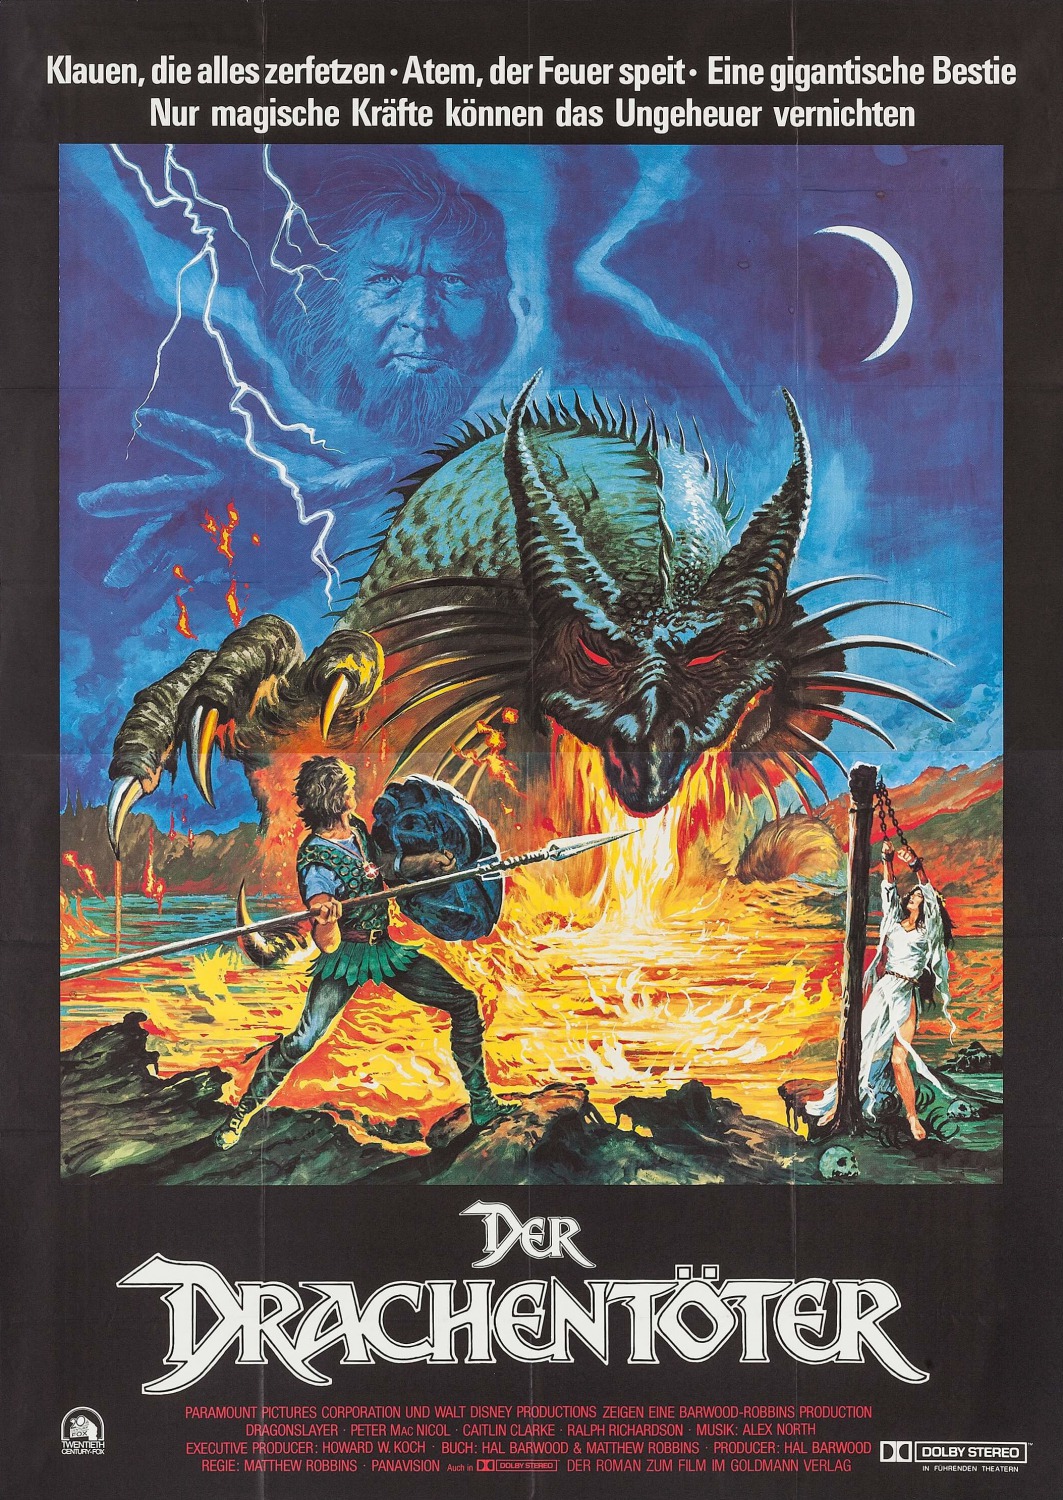 Extra Large Movie Poster Image for Dragonslayer (#5 of 5)